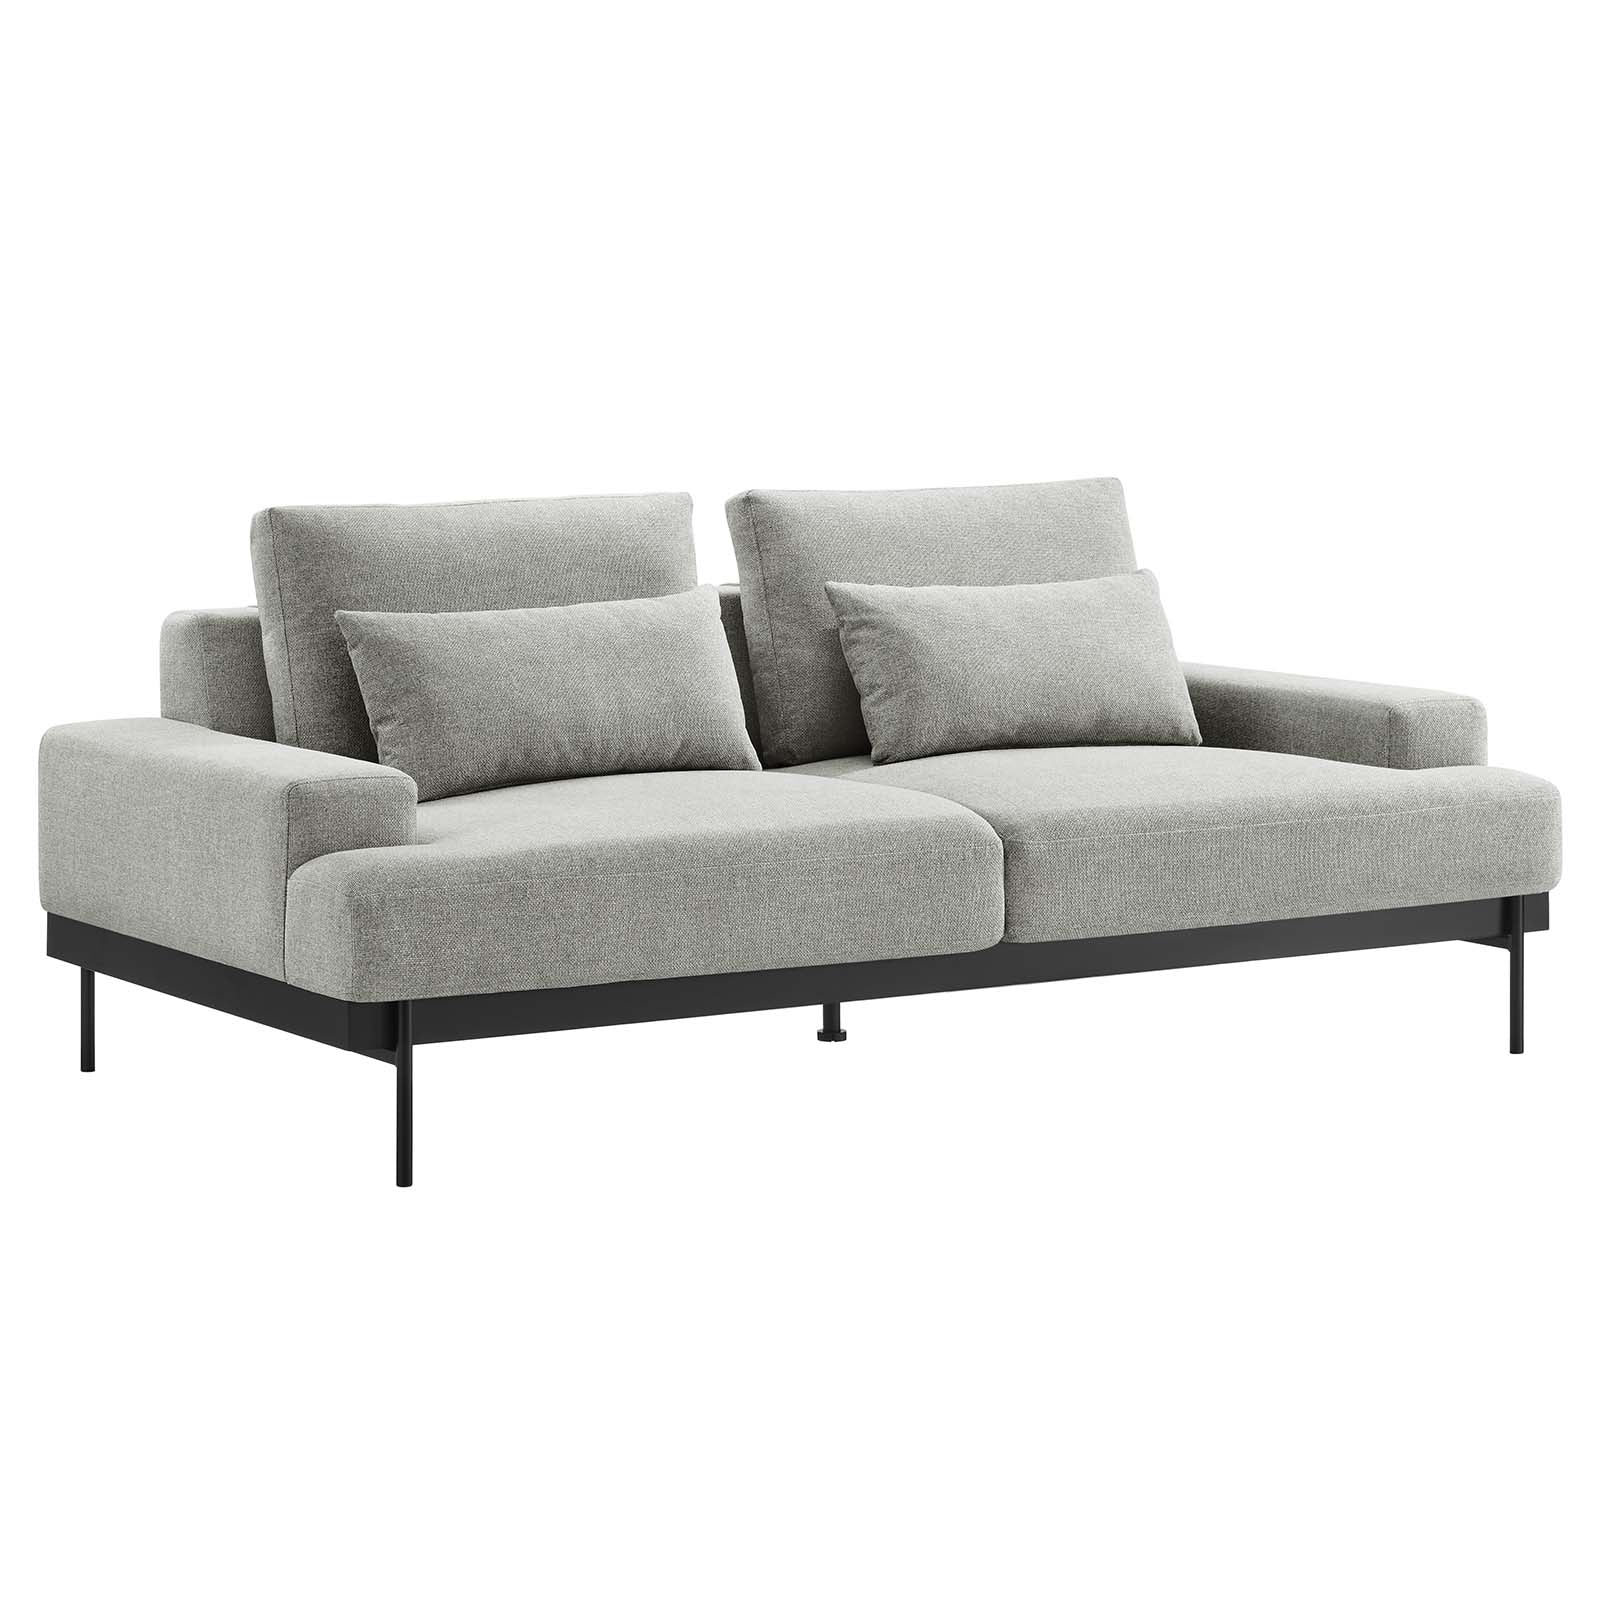 Modway Sofas & Couches - Proximity-Upholstered-Fabric-Sofa-Light-Gray